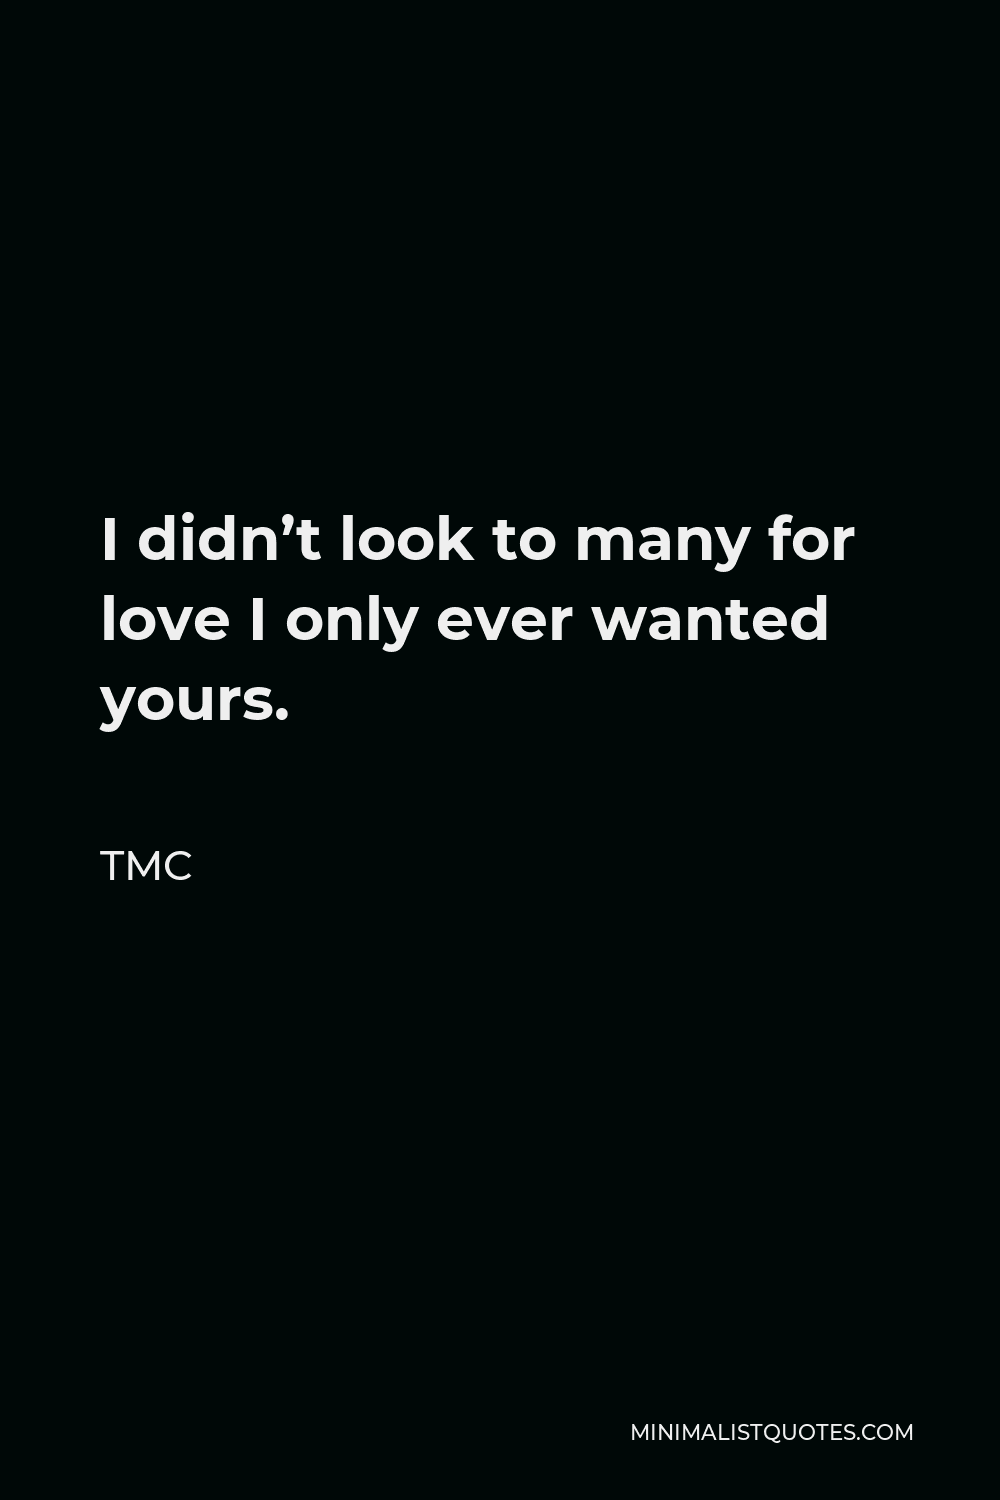 TMC Quote - I didn’t look to many for love I only ever wanted yours.